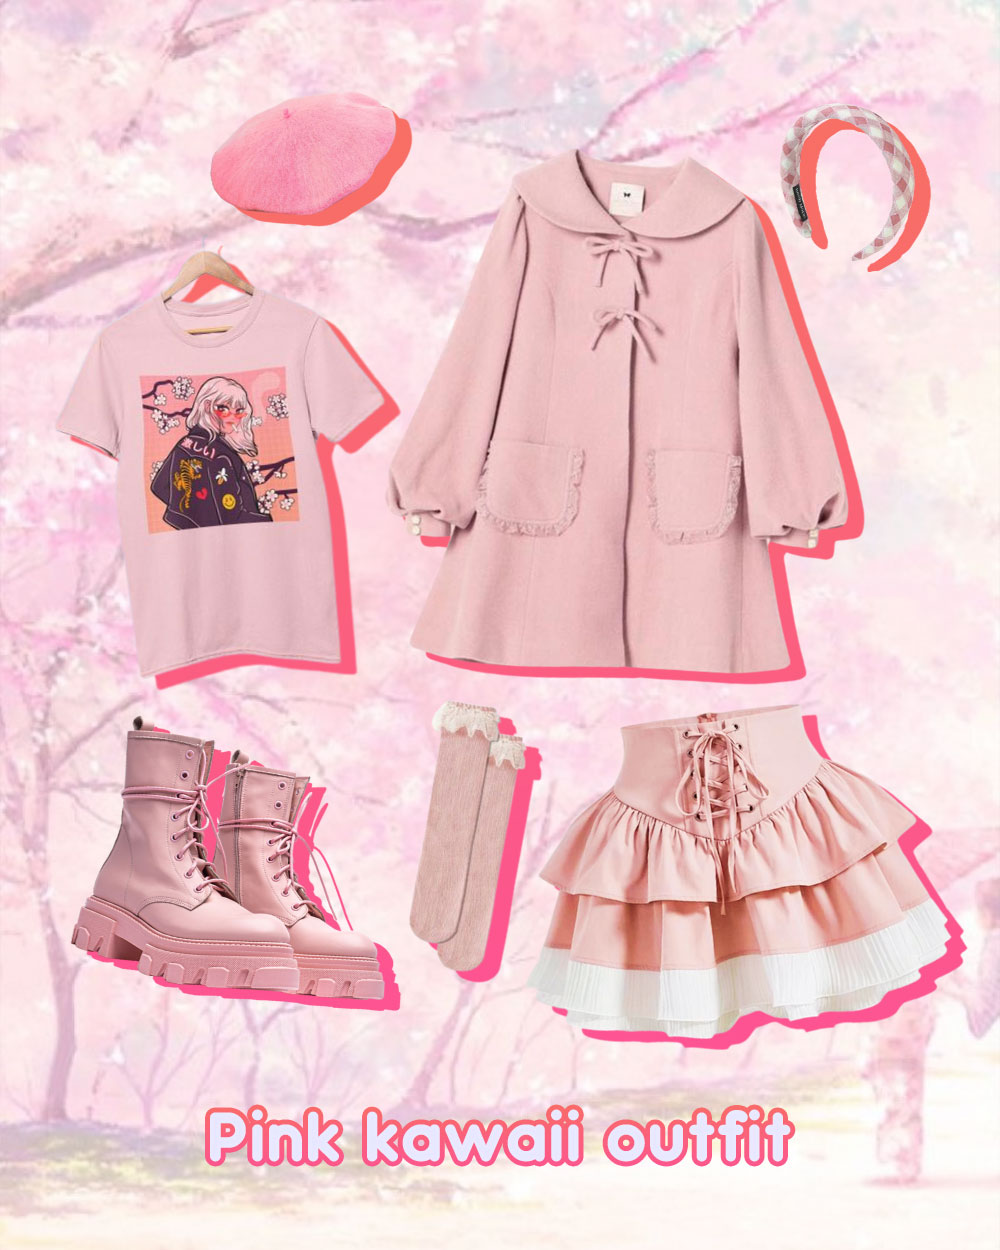 pink kawaii outfit inspiration - sailor pink coat, pink anime t-shirt, pink boots, pink laced socks, french hat, pleated pink miniskirt